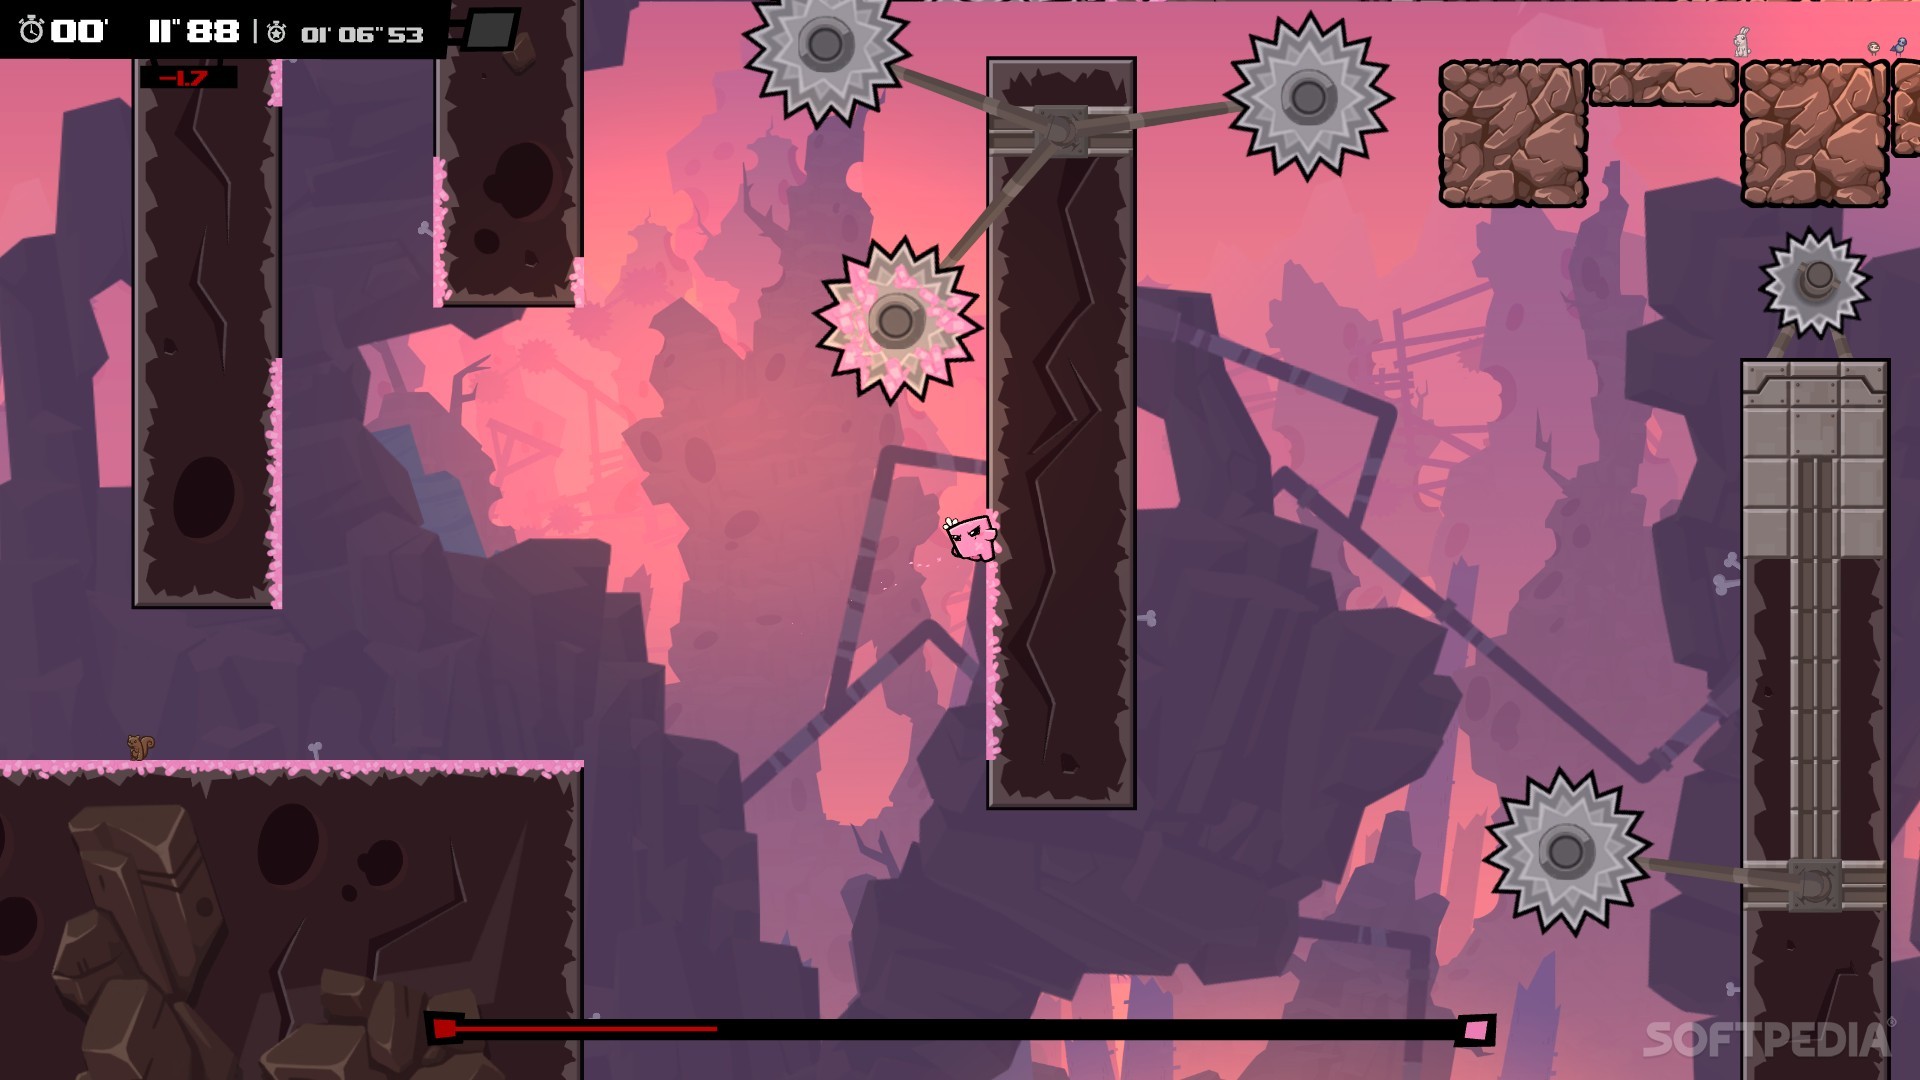 test your meat super meat boy forever